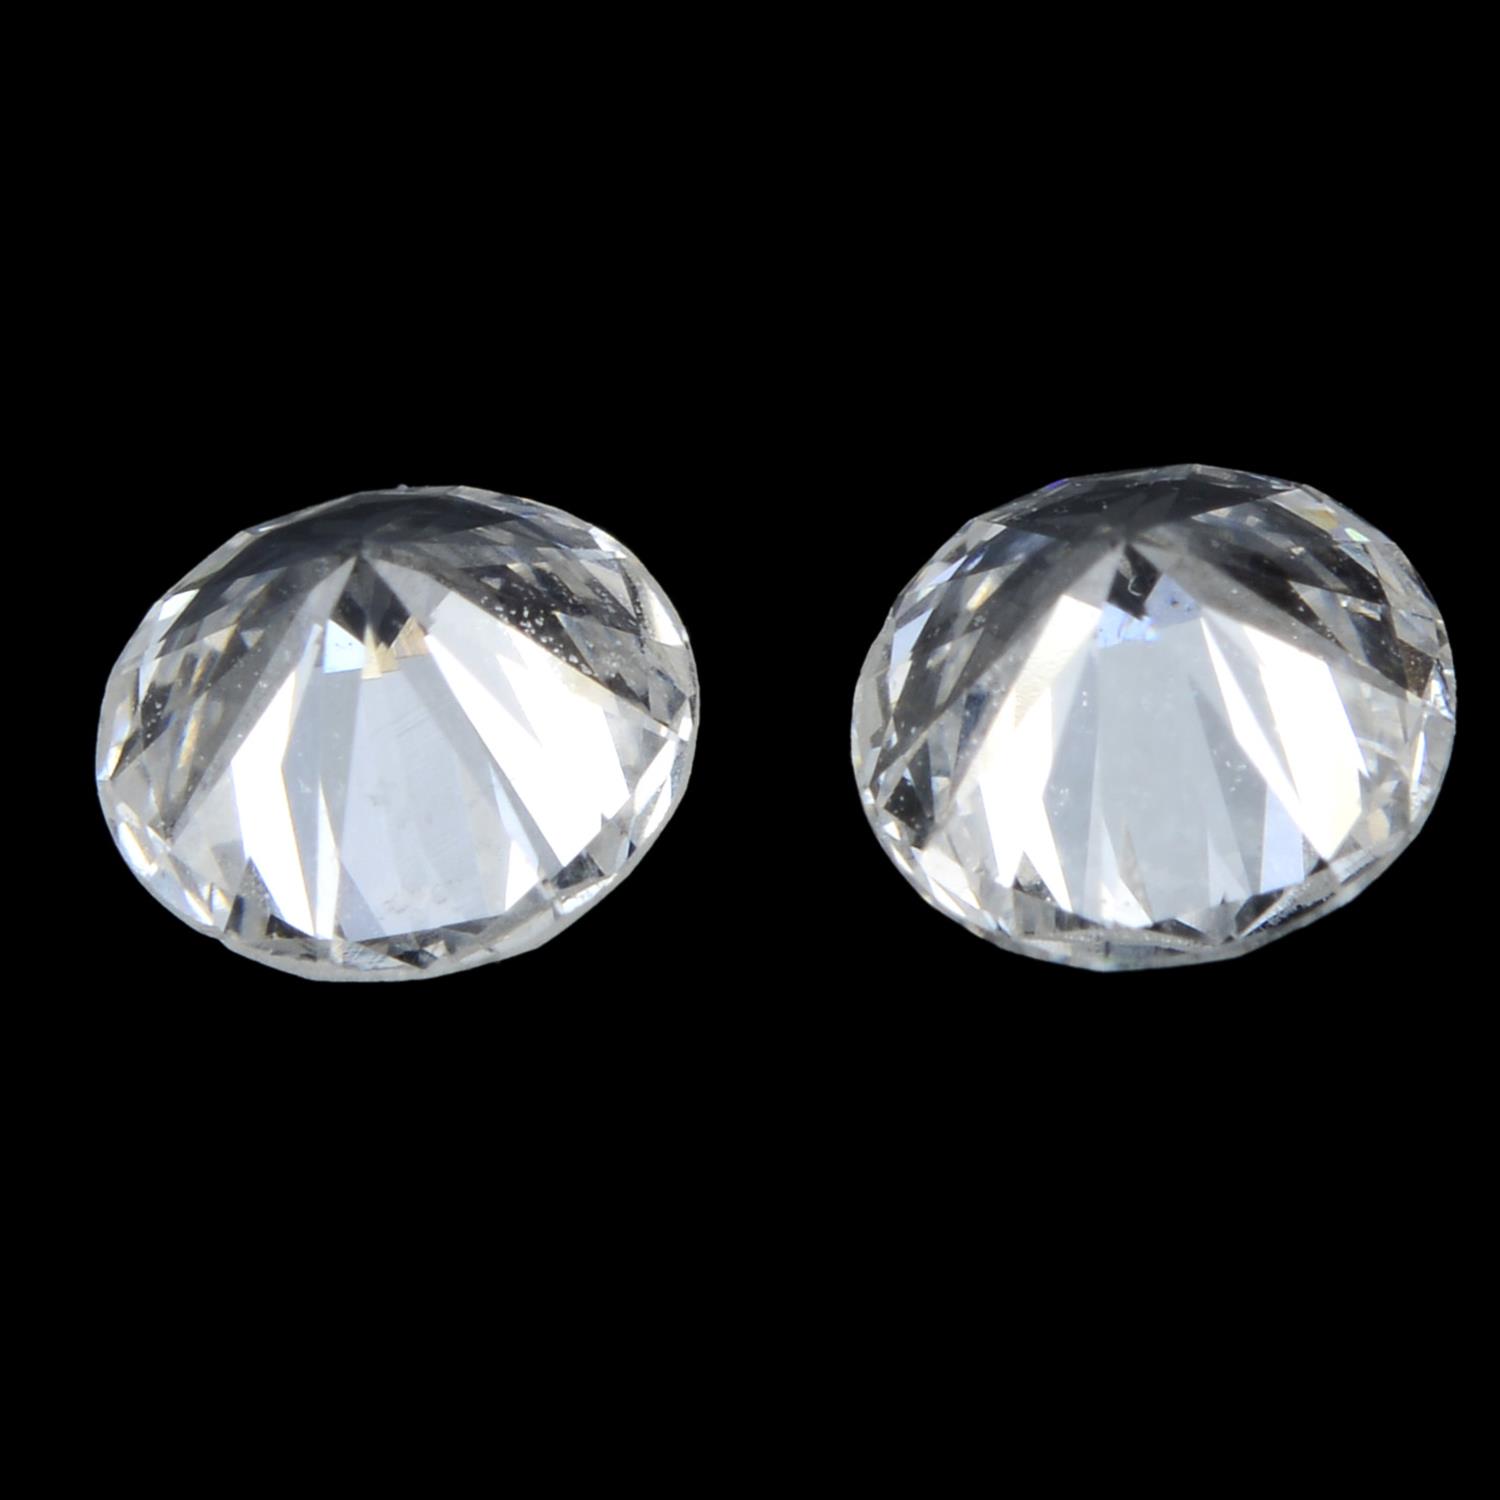 Pair of brilliant cut diamonds weighing 0.48ct - Image 2 of 2